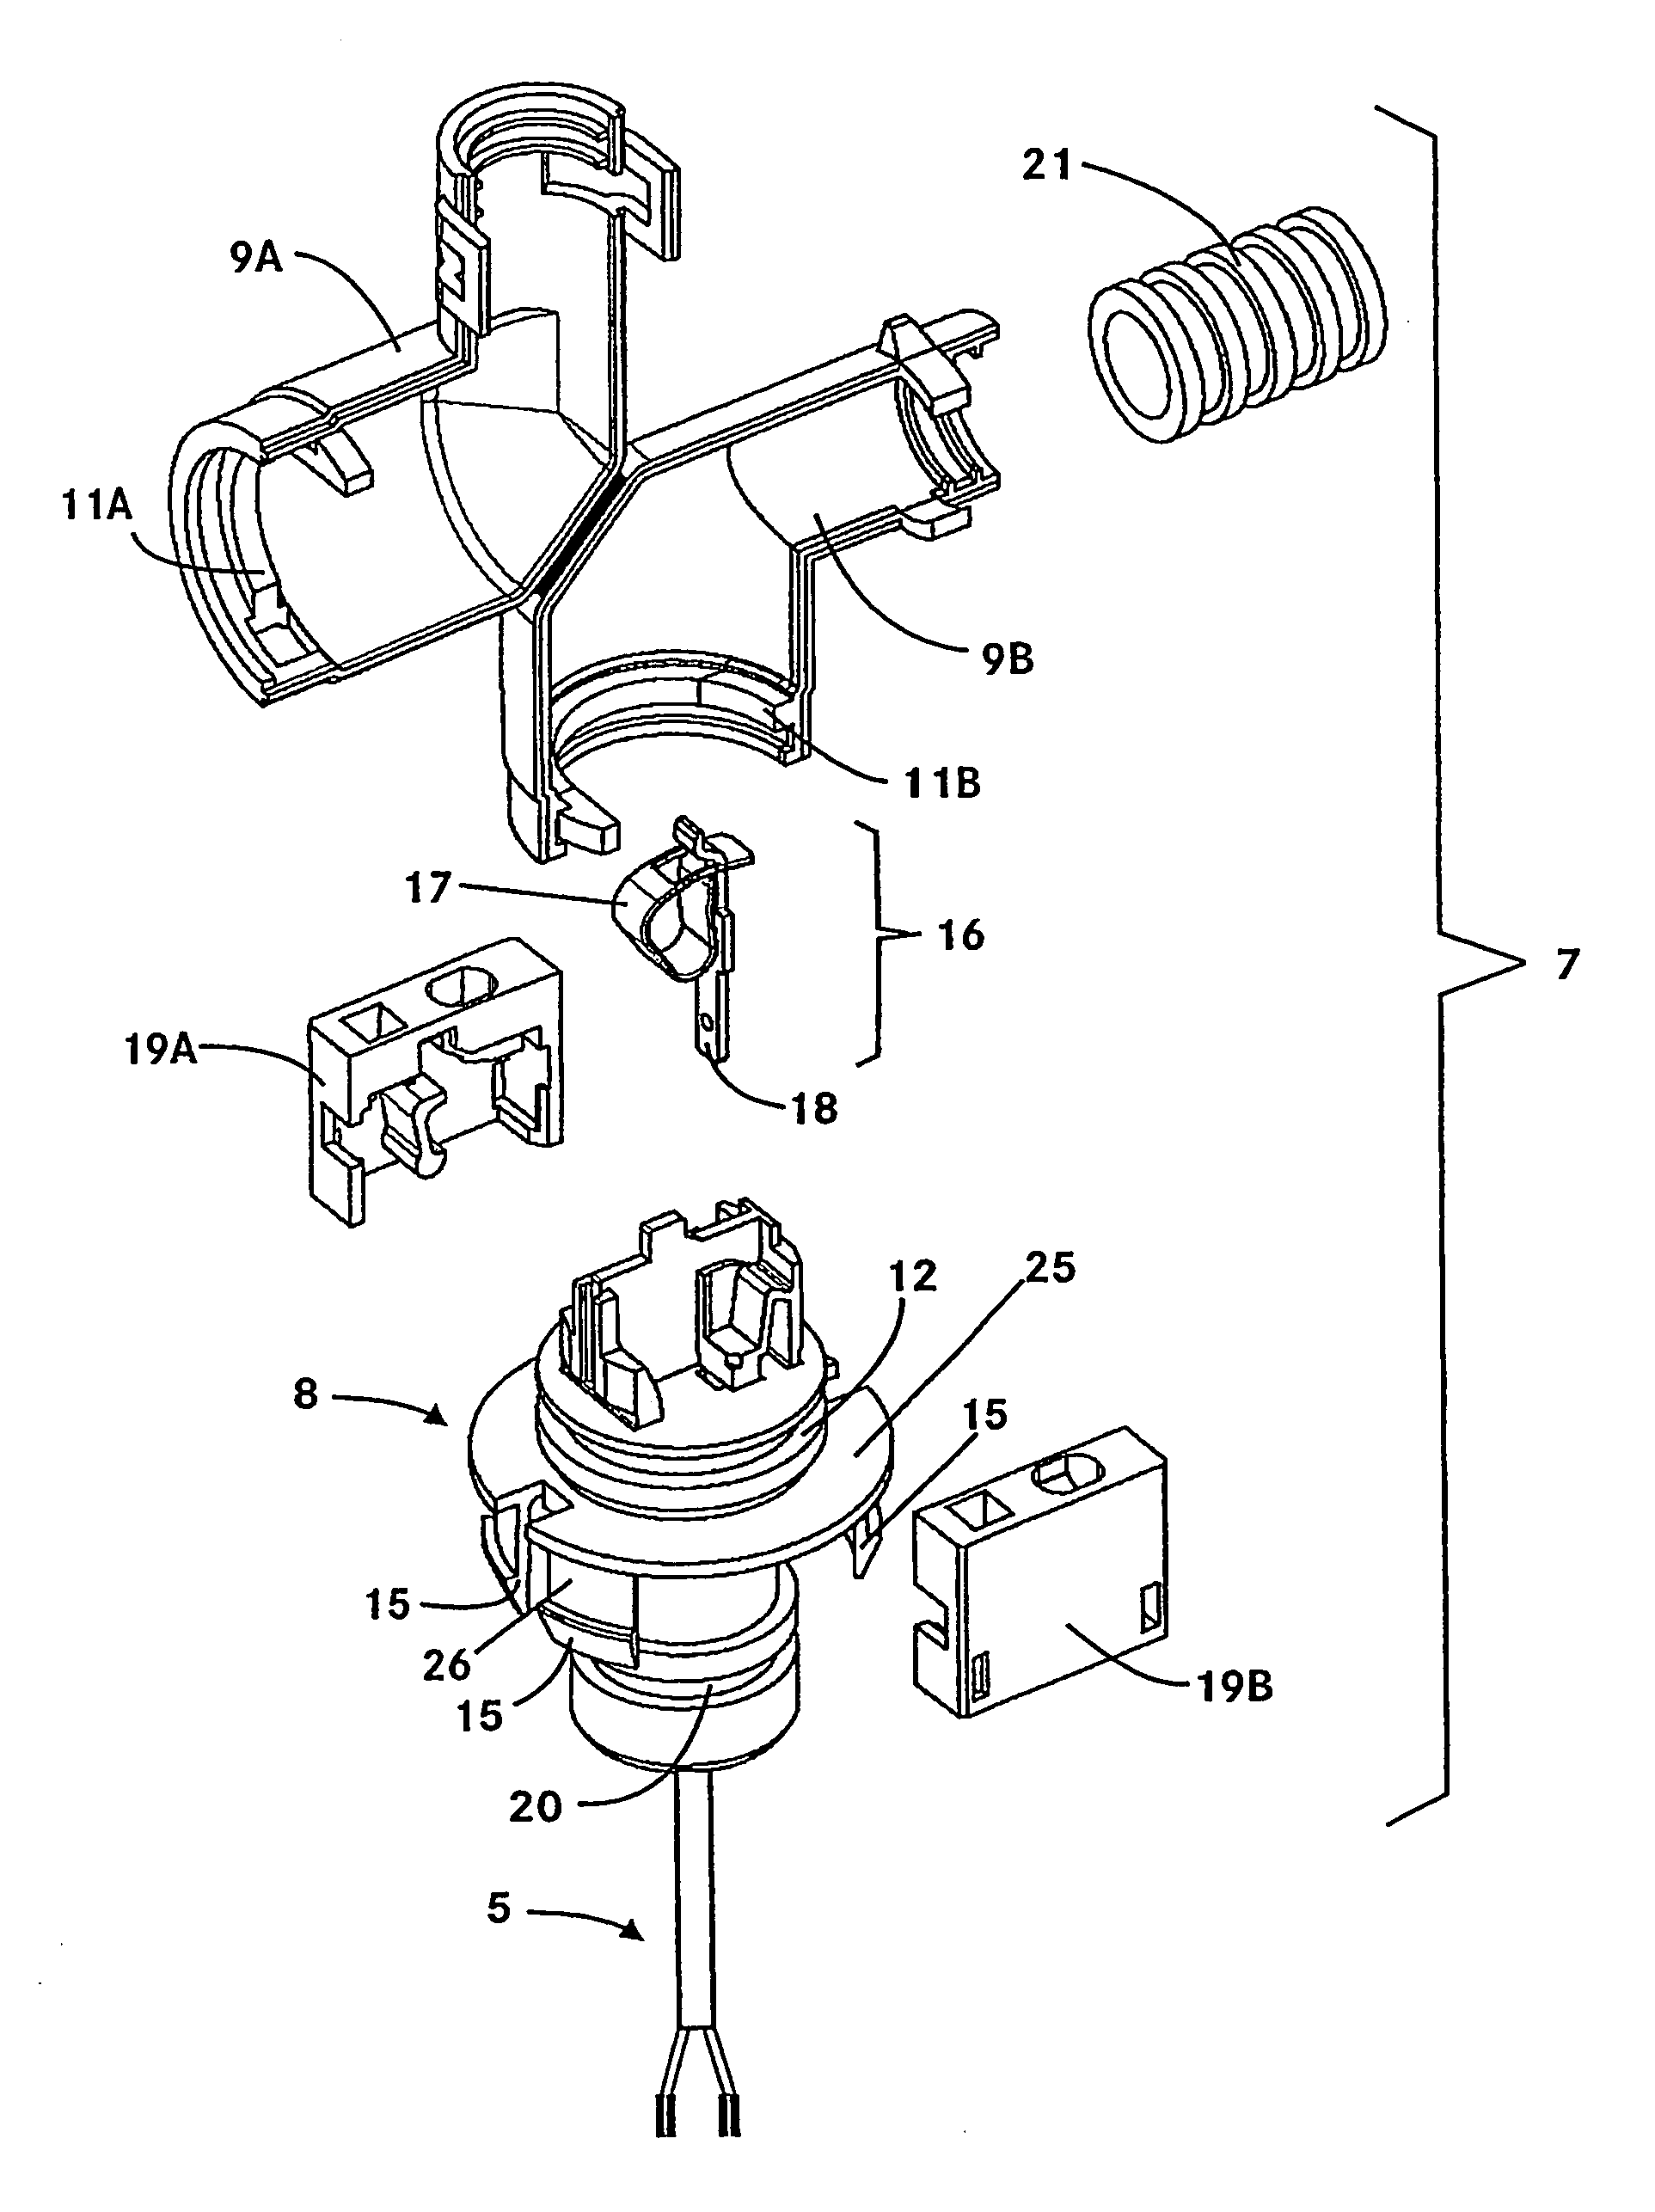 Internal combustion engine comprising a connecting means for connecting a first section of a wire harness on a cylinder head housing to a second section of the same